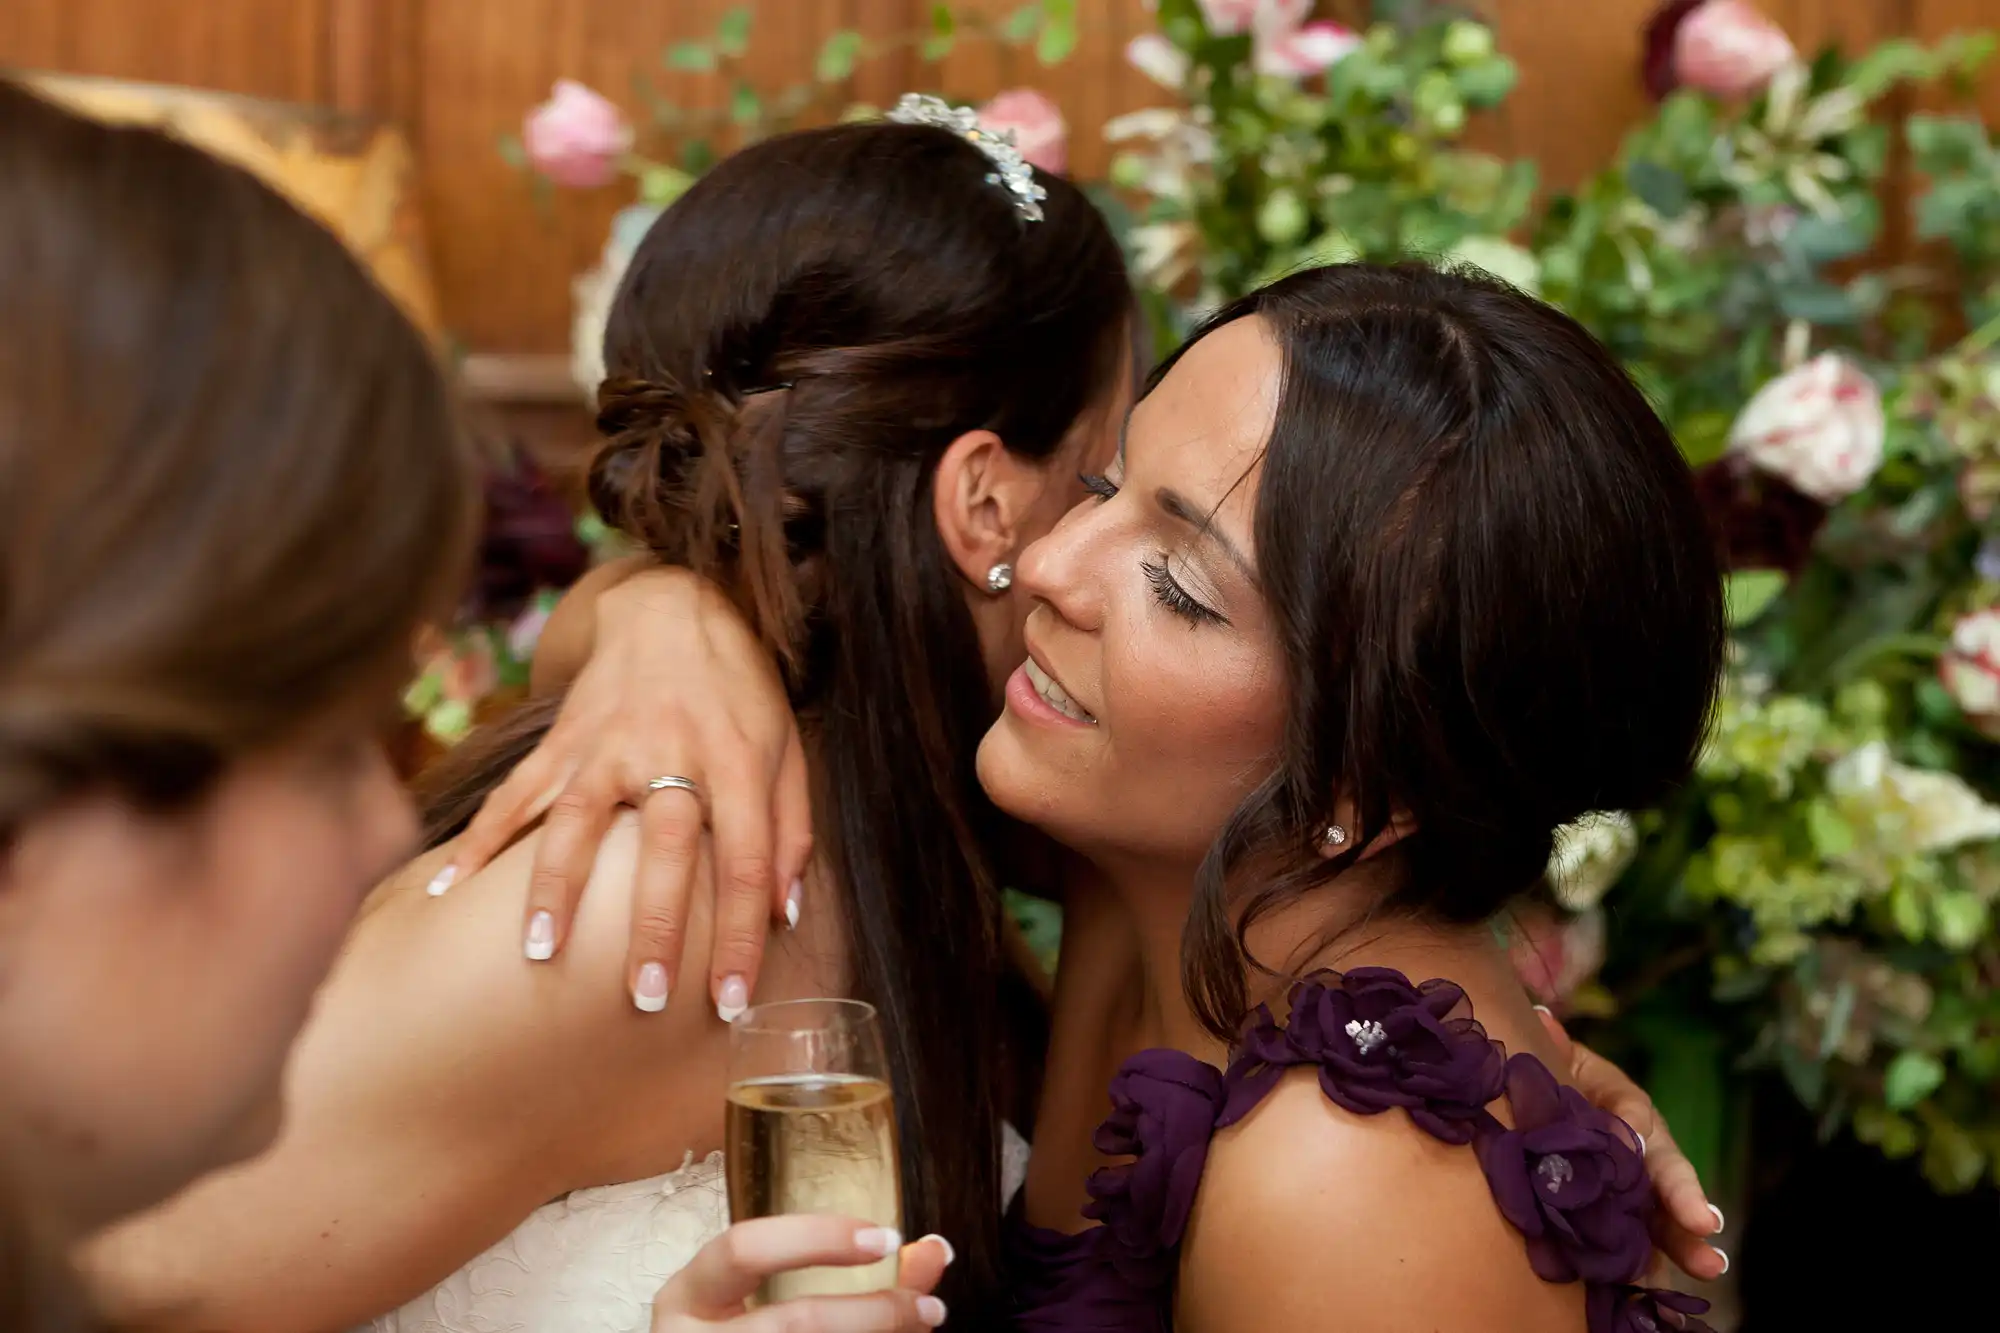 A bride and a bridesmaid embracing at a wedding reception, surrounded by floral decorations. the bridesmaid holds a champagne glass.